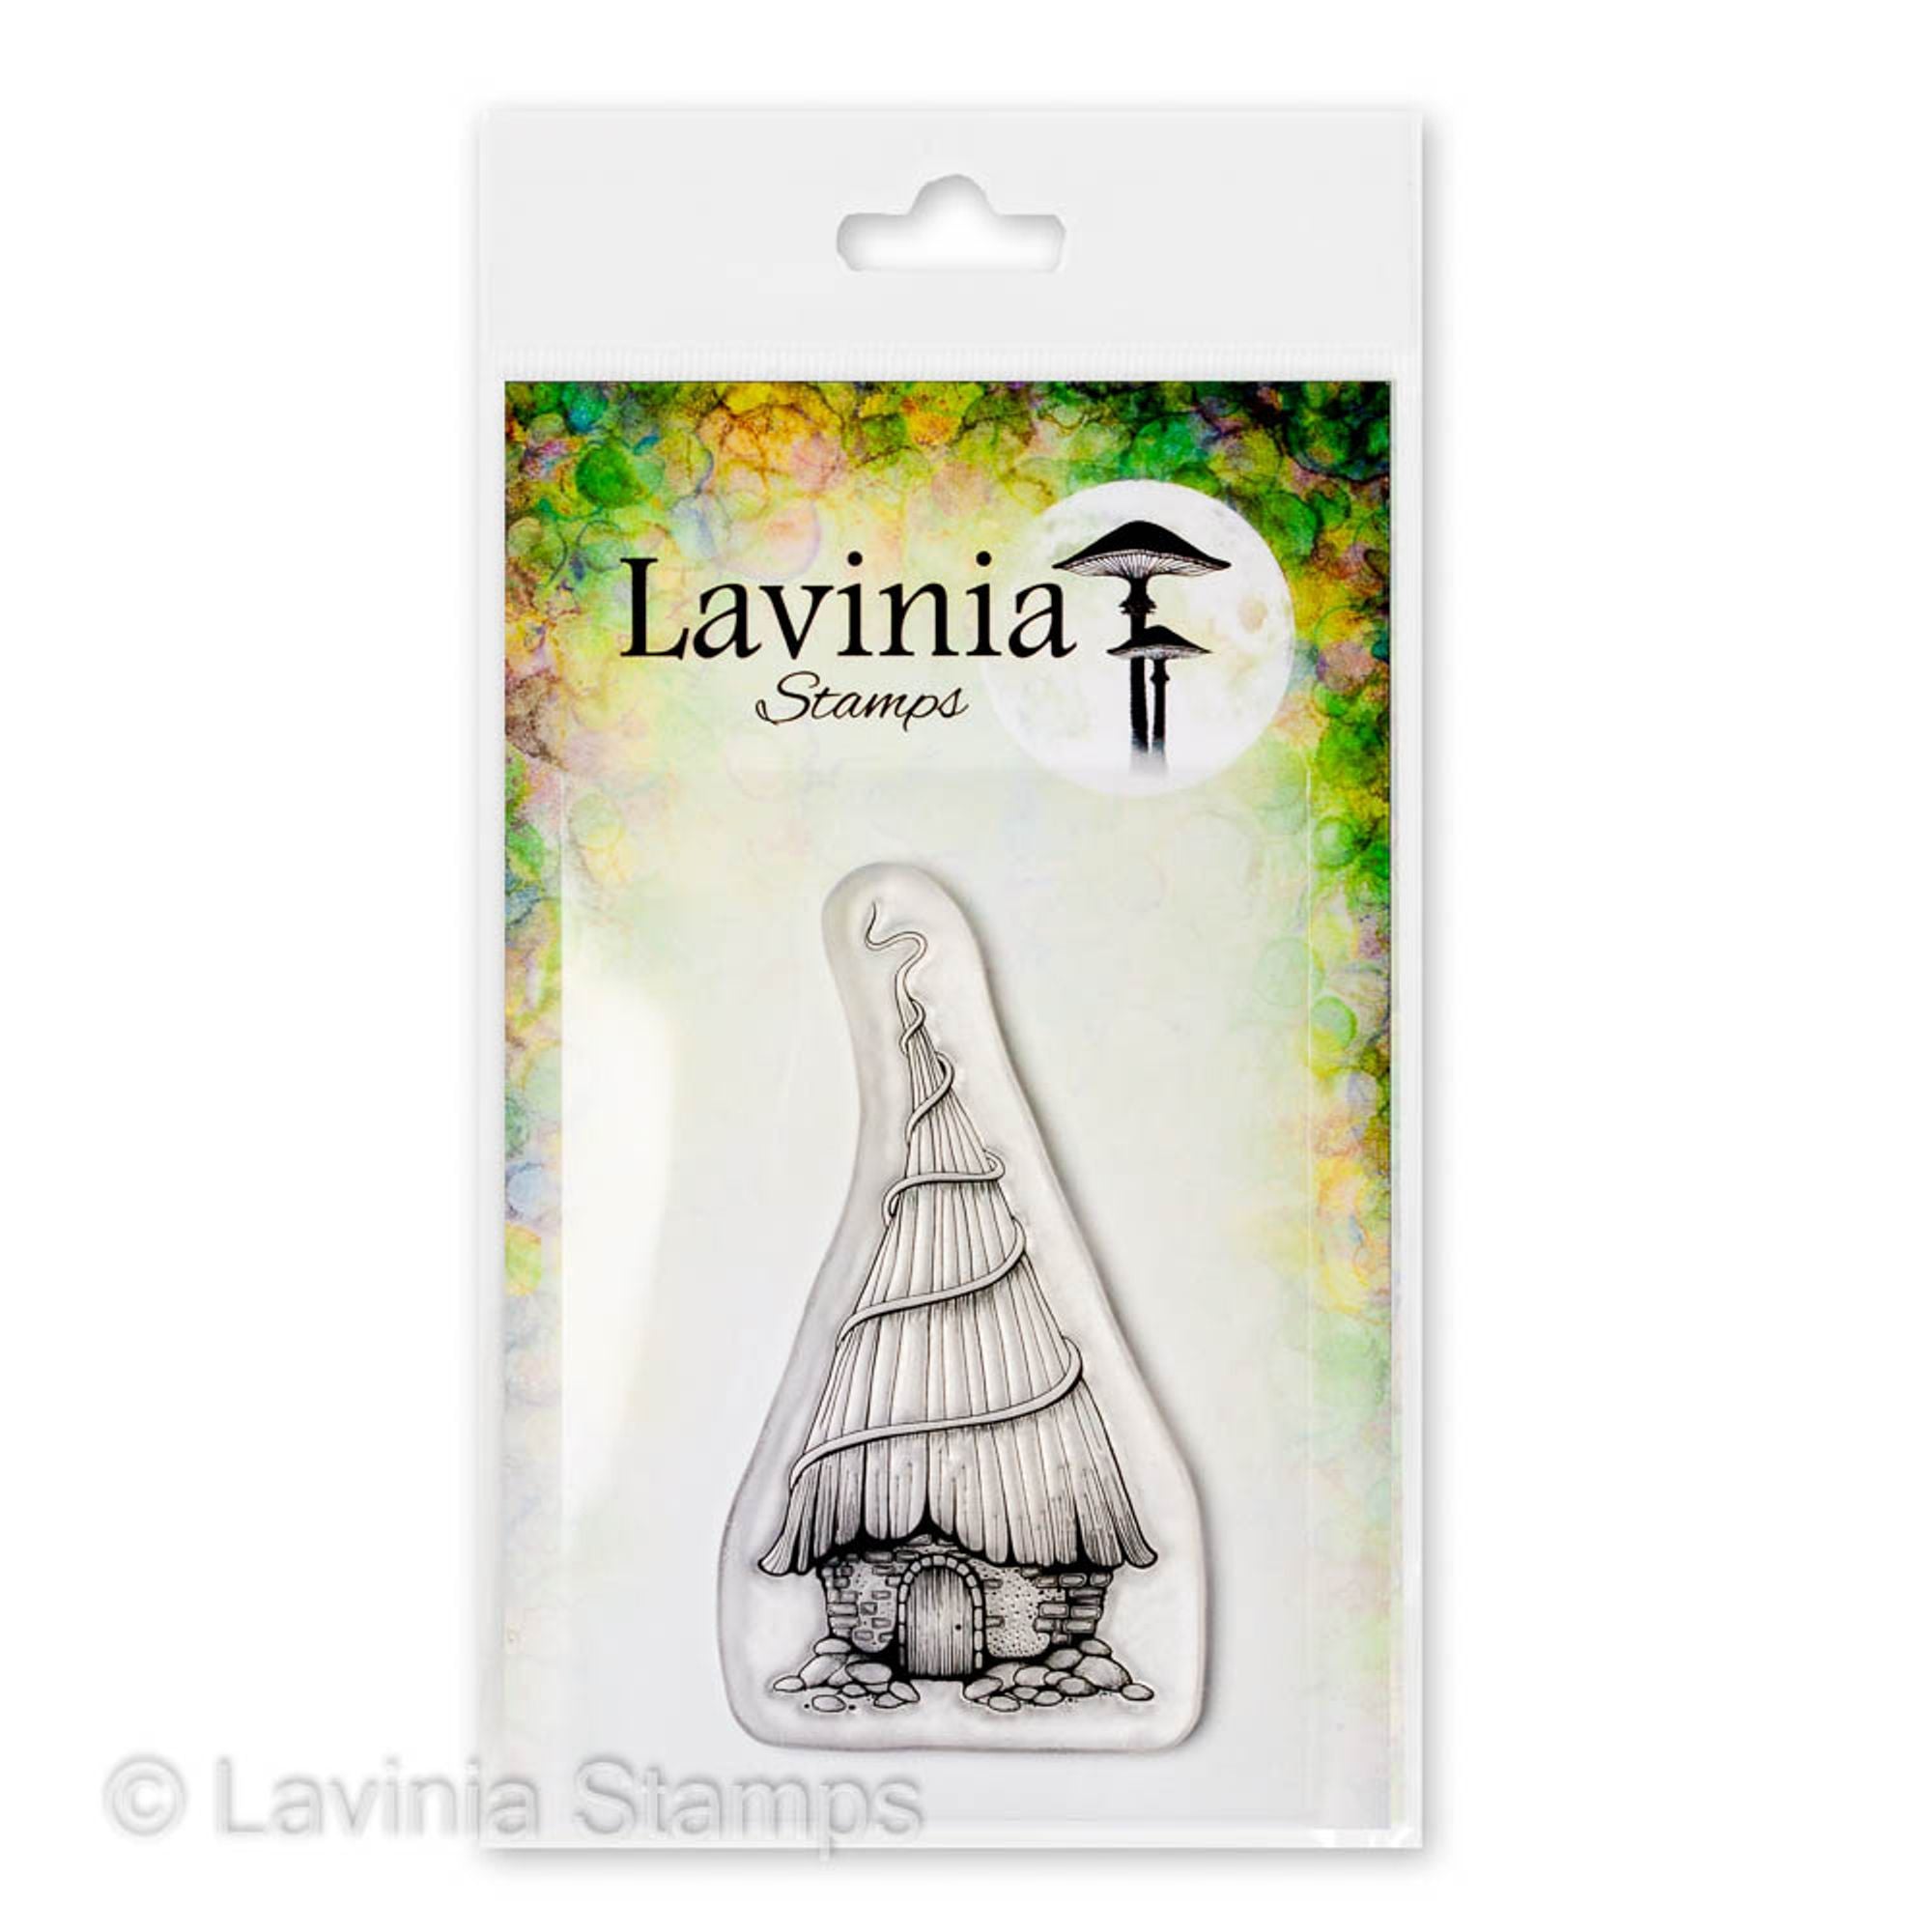 Buy Authentic Lavinia Stamps - Ickle Pumpkins Stamp today